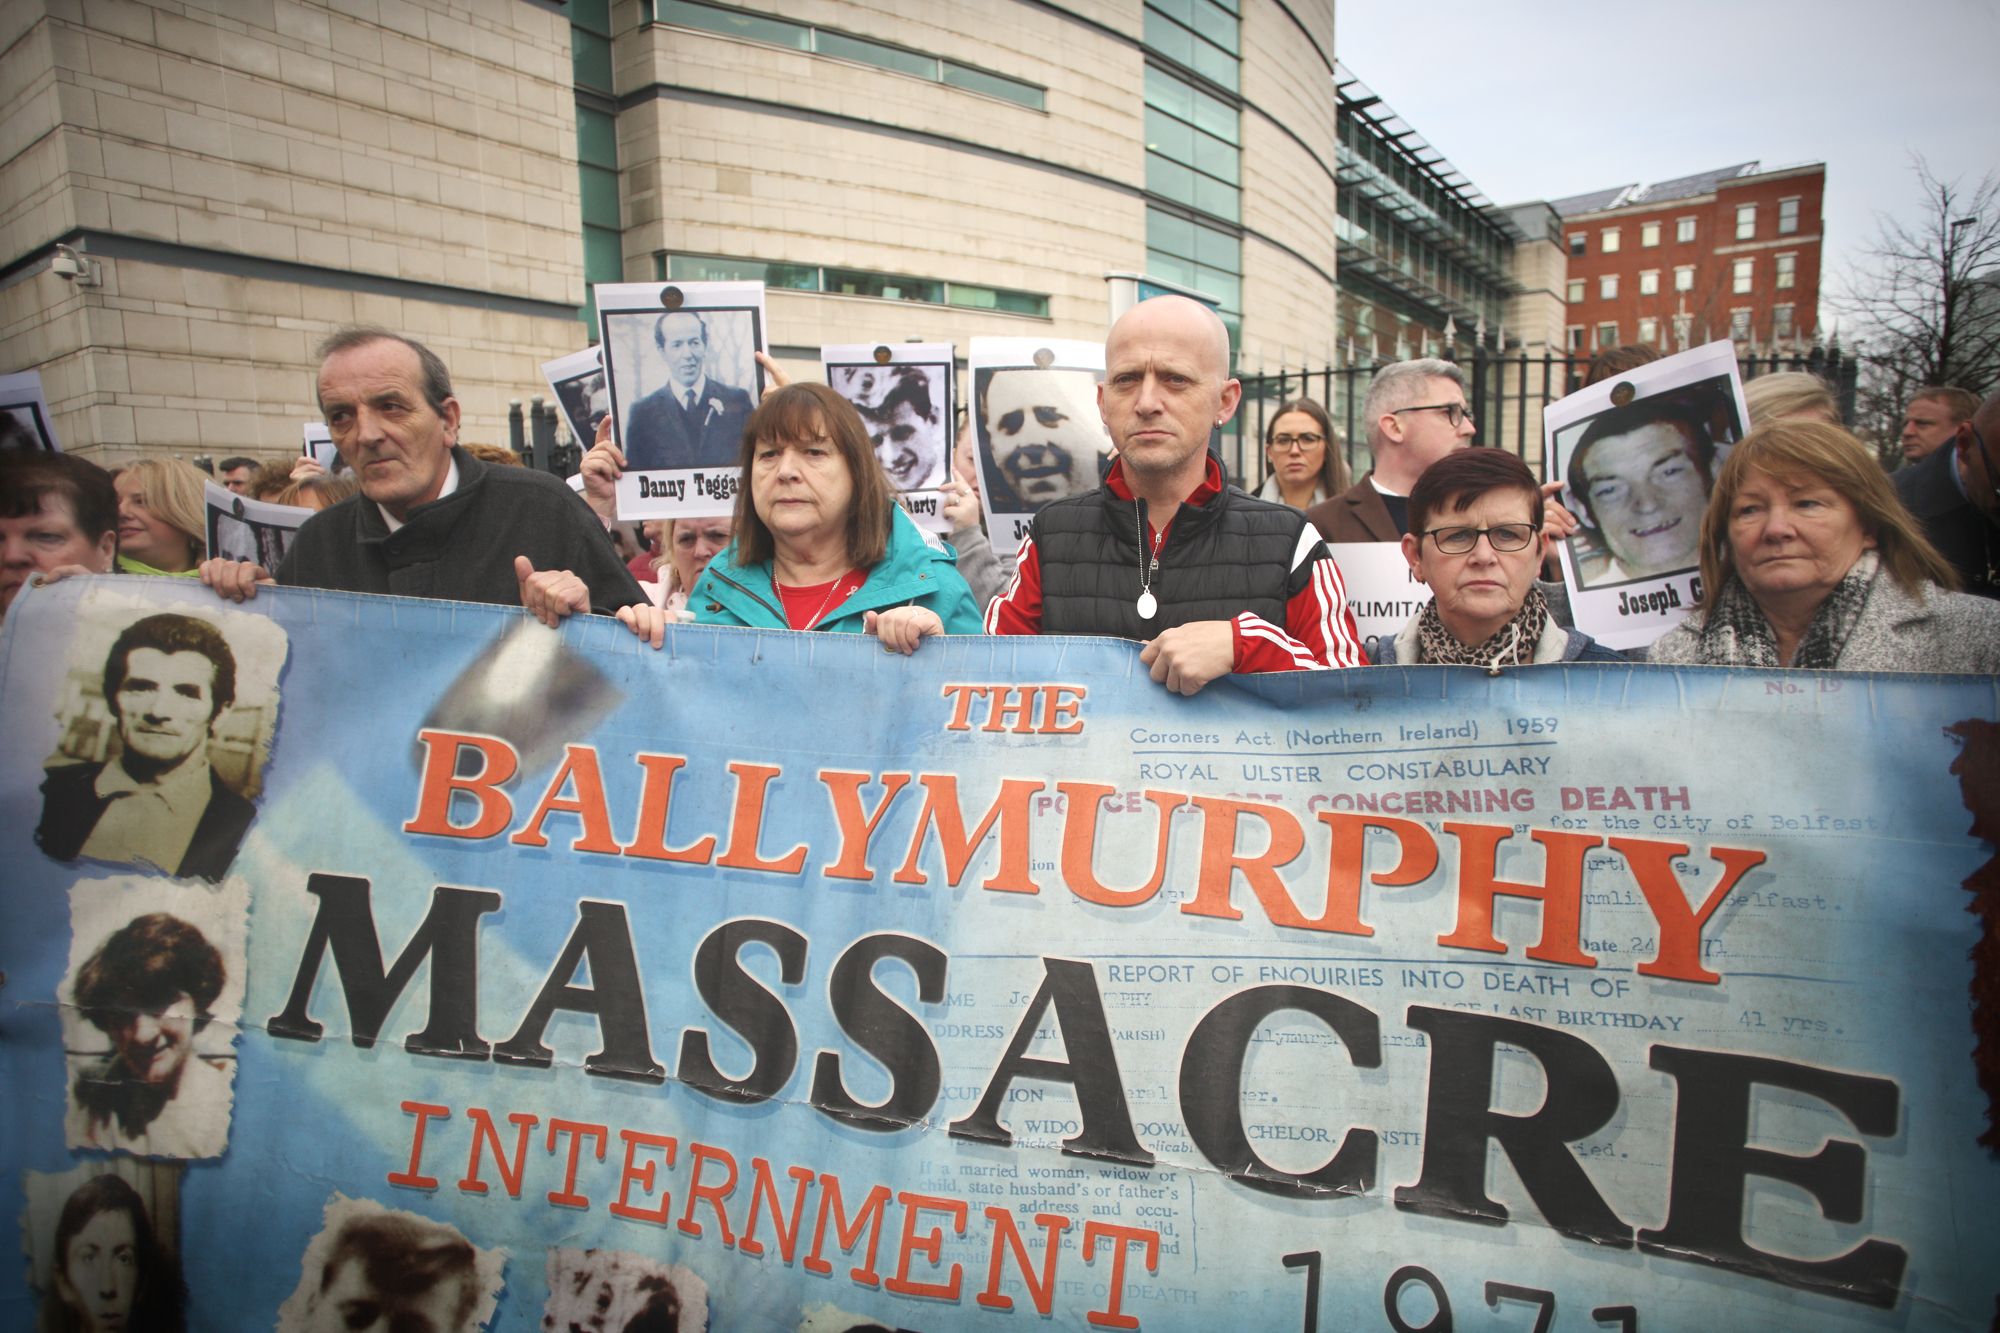 Significant' damages paid to two survivors of Ballymurphy Massacre